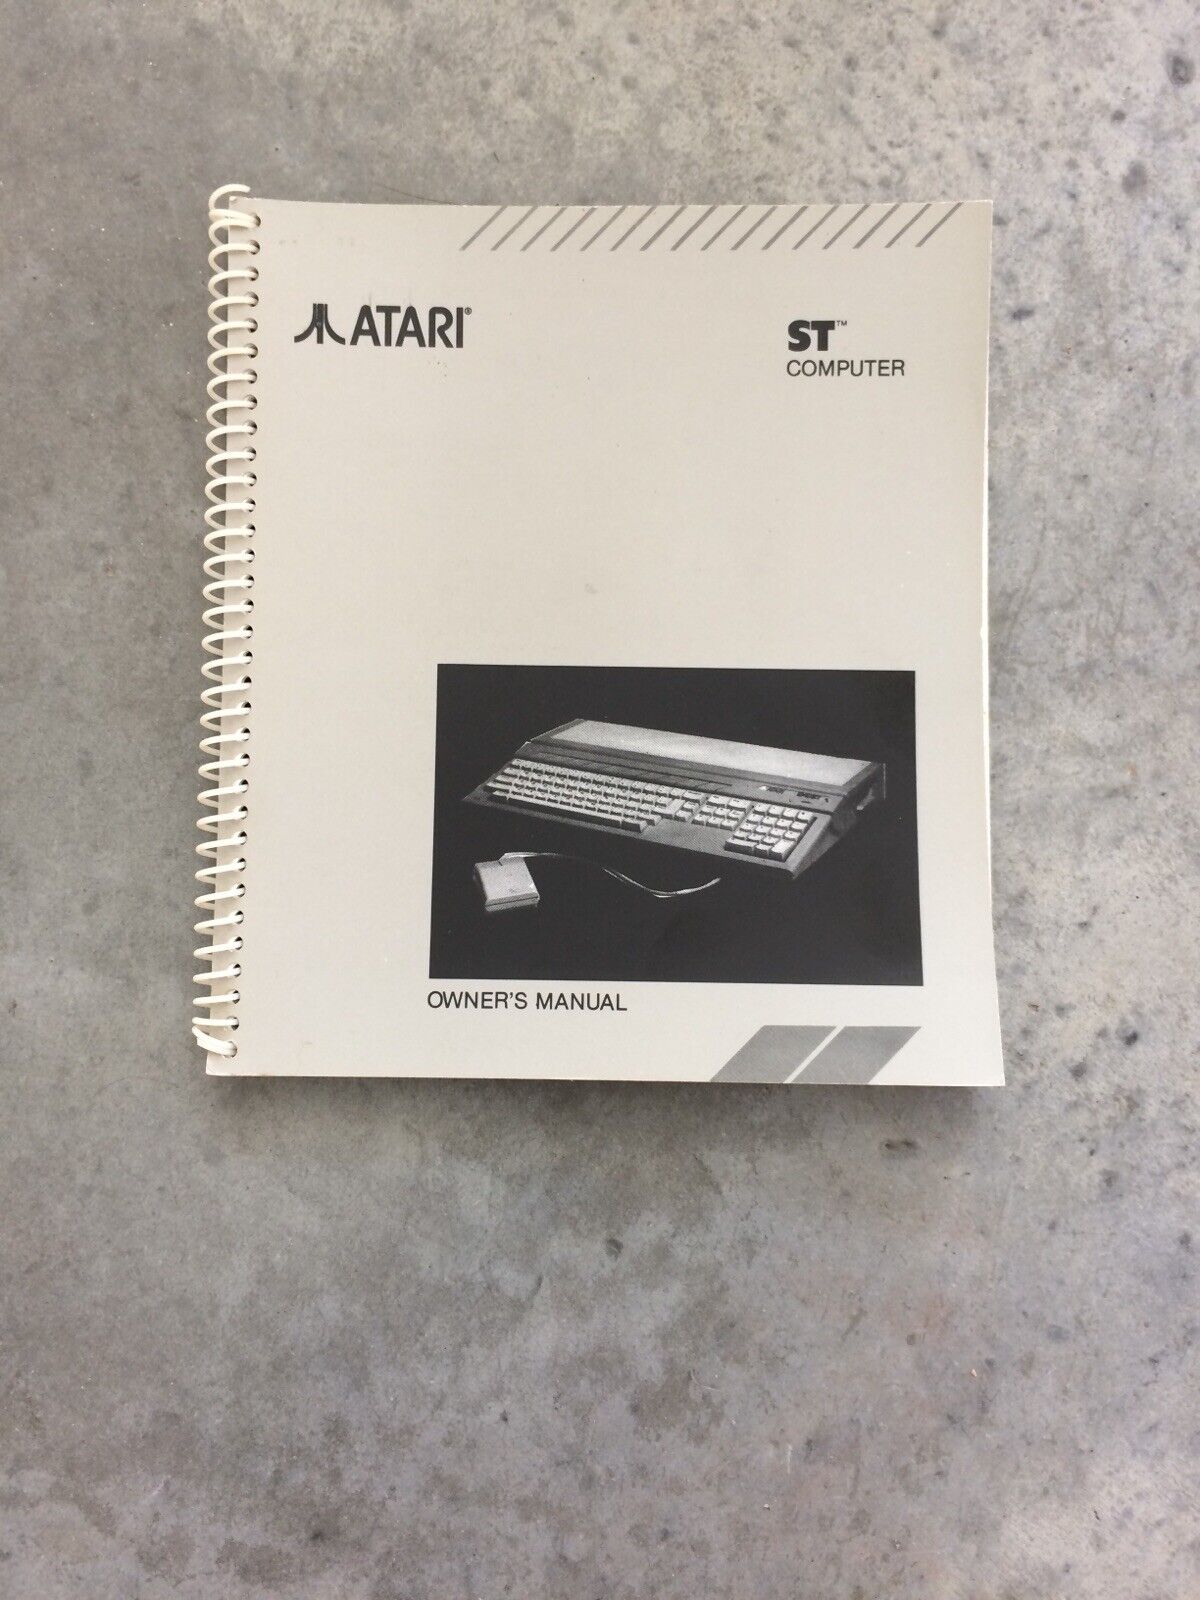 Vintage 1986 Atari ST Computer Owners Manual In Excellent Shape